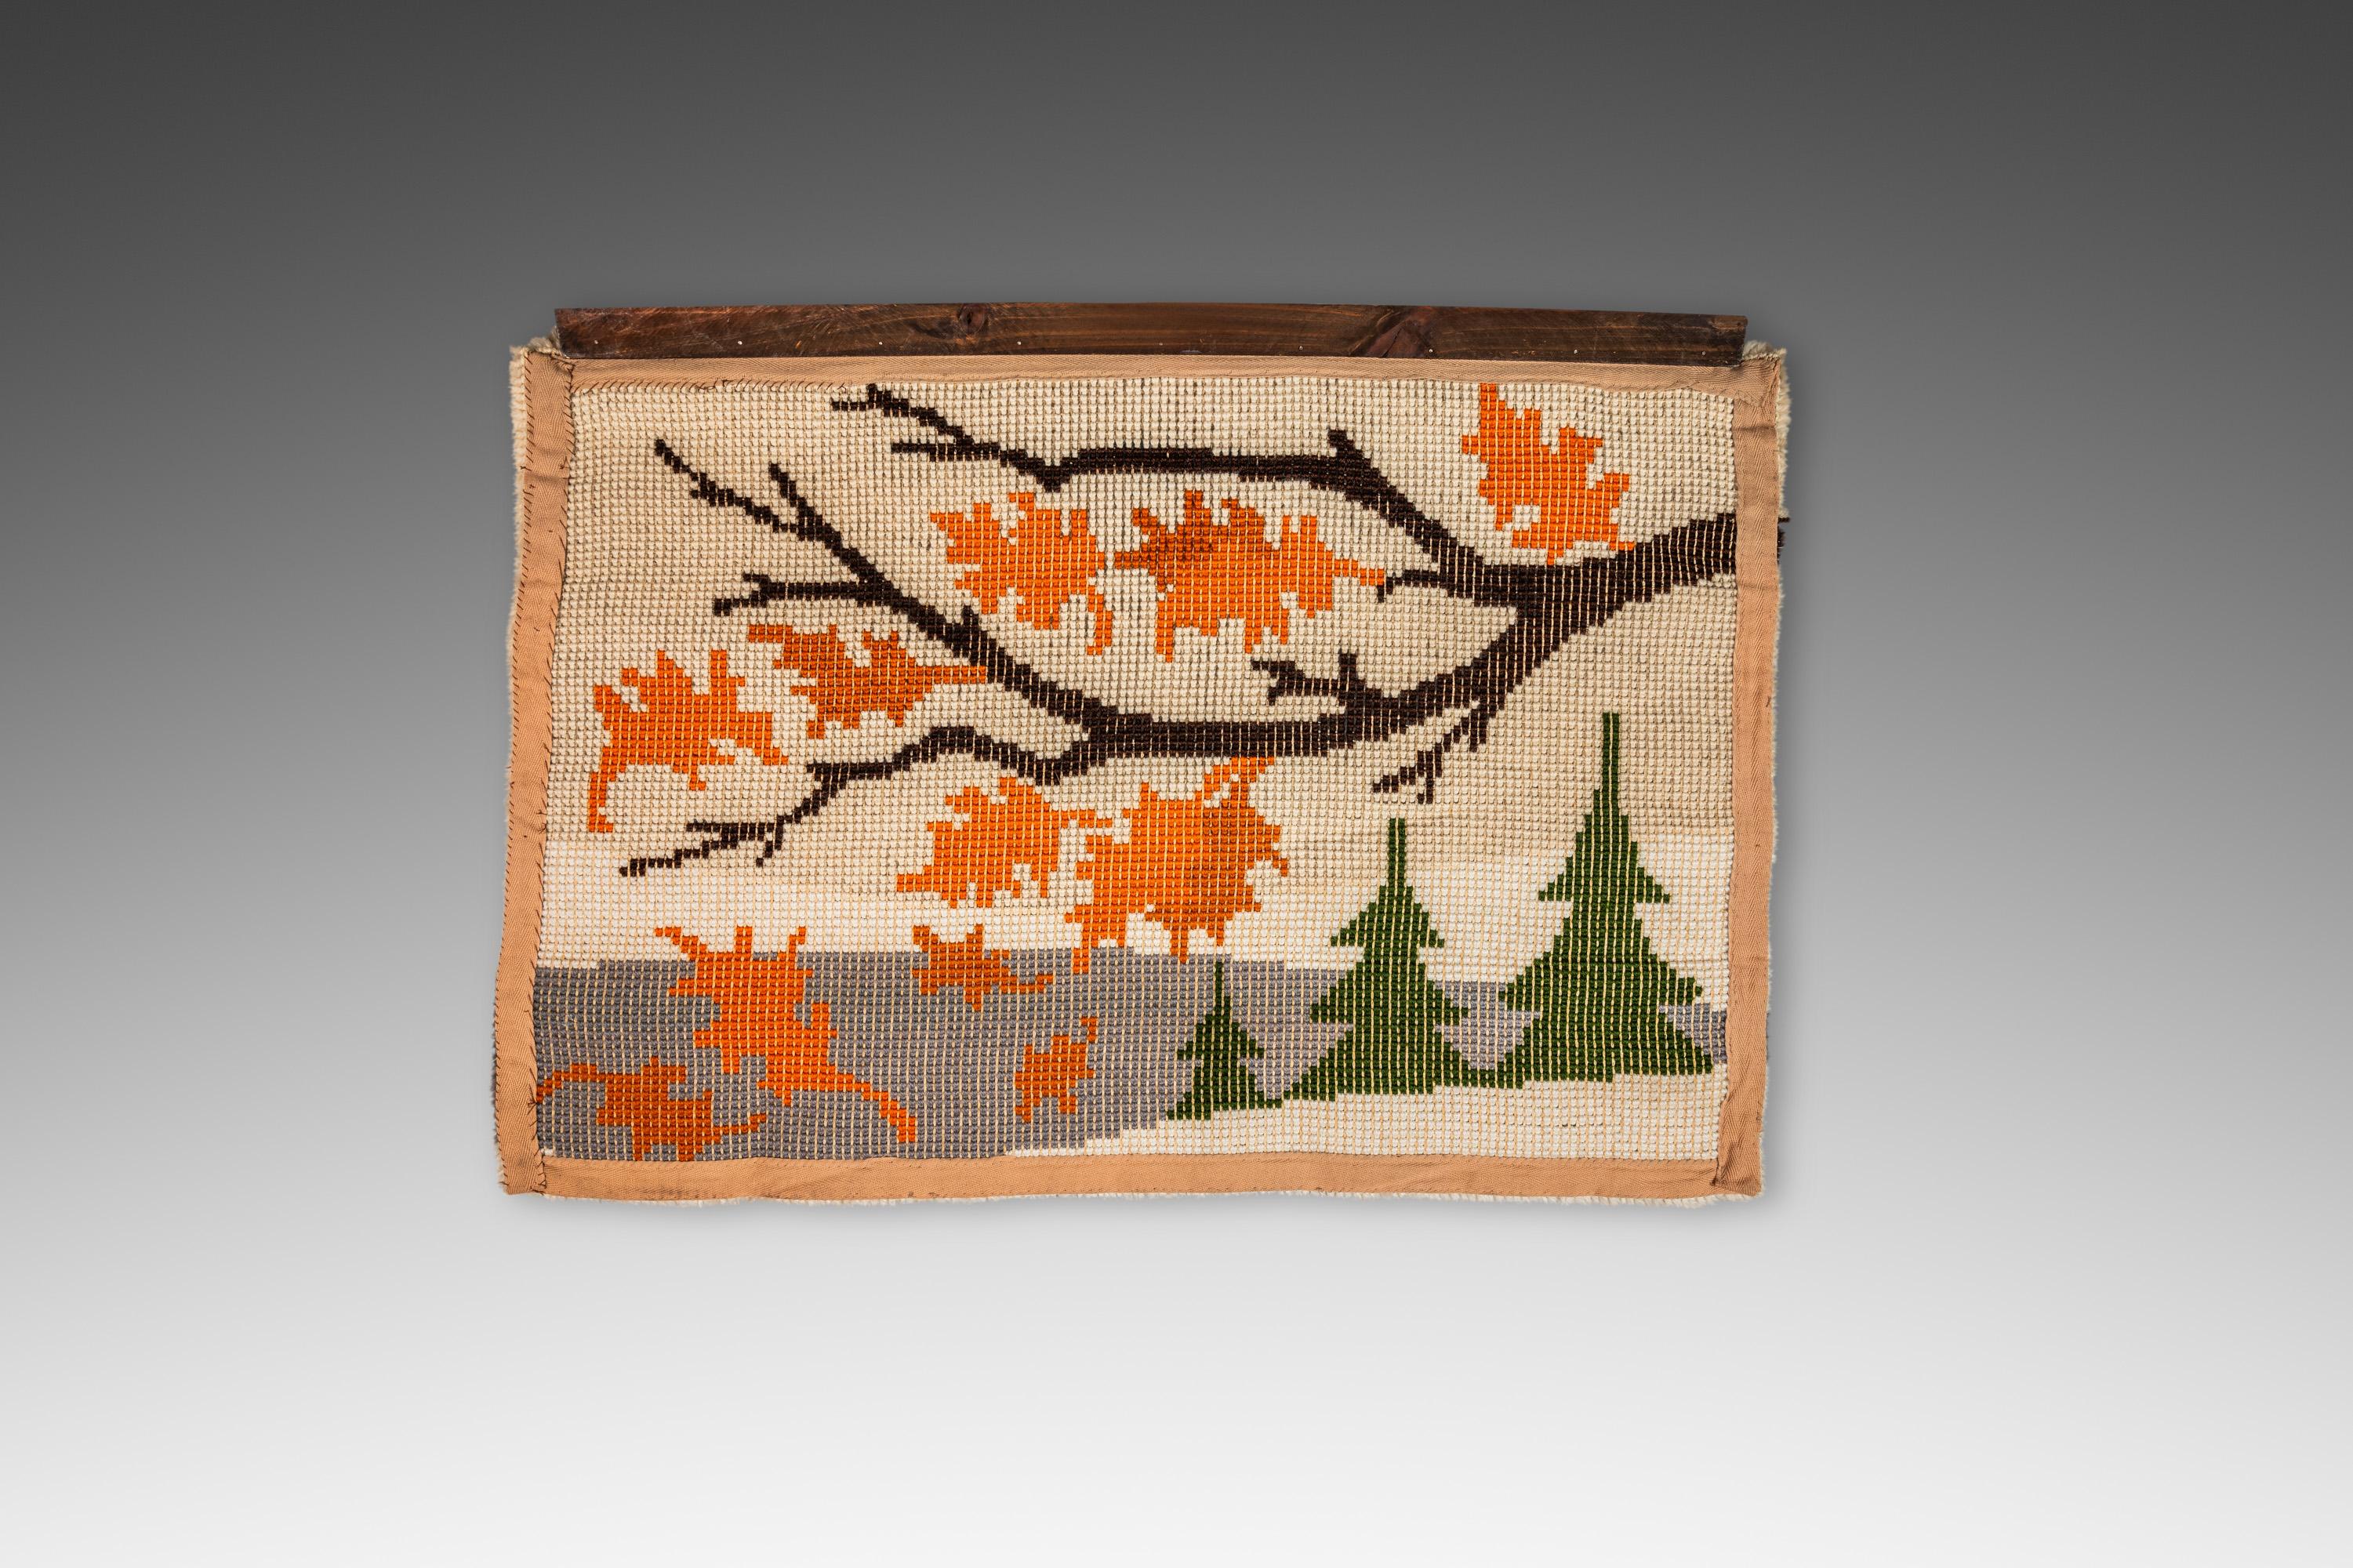 Equal parts charm and nostalgia this lovely hand-made, latch-hook tapestry is ideal for a cabin in the woods. With warm, vintage colors and intricate details this wall-art piece is sure to add a touch of delightful scenic depth to any room. Make it